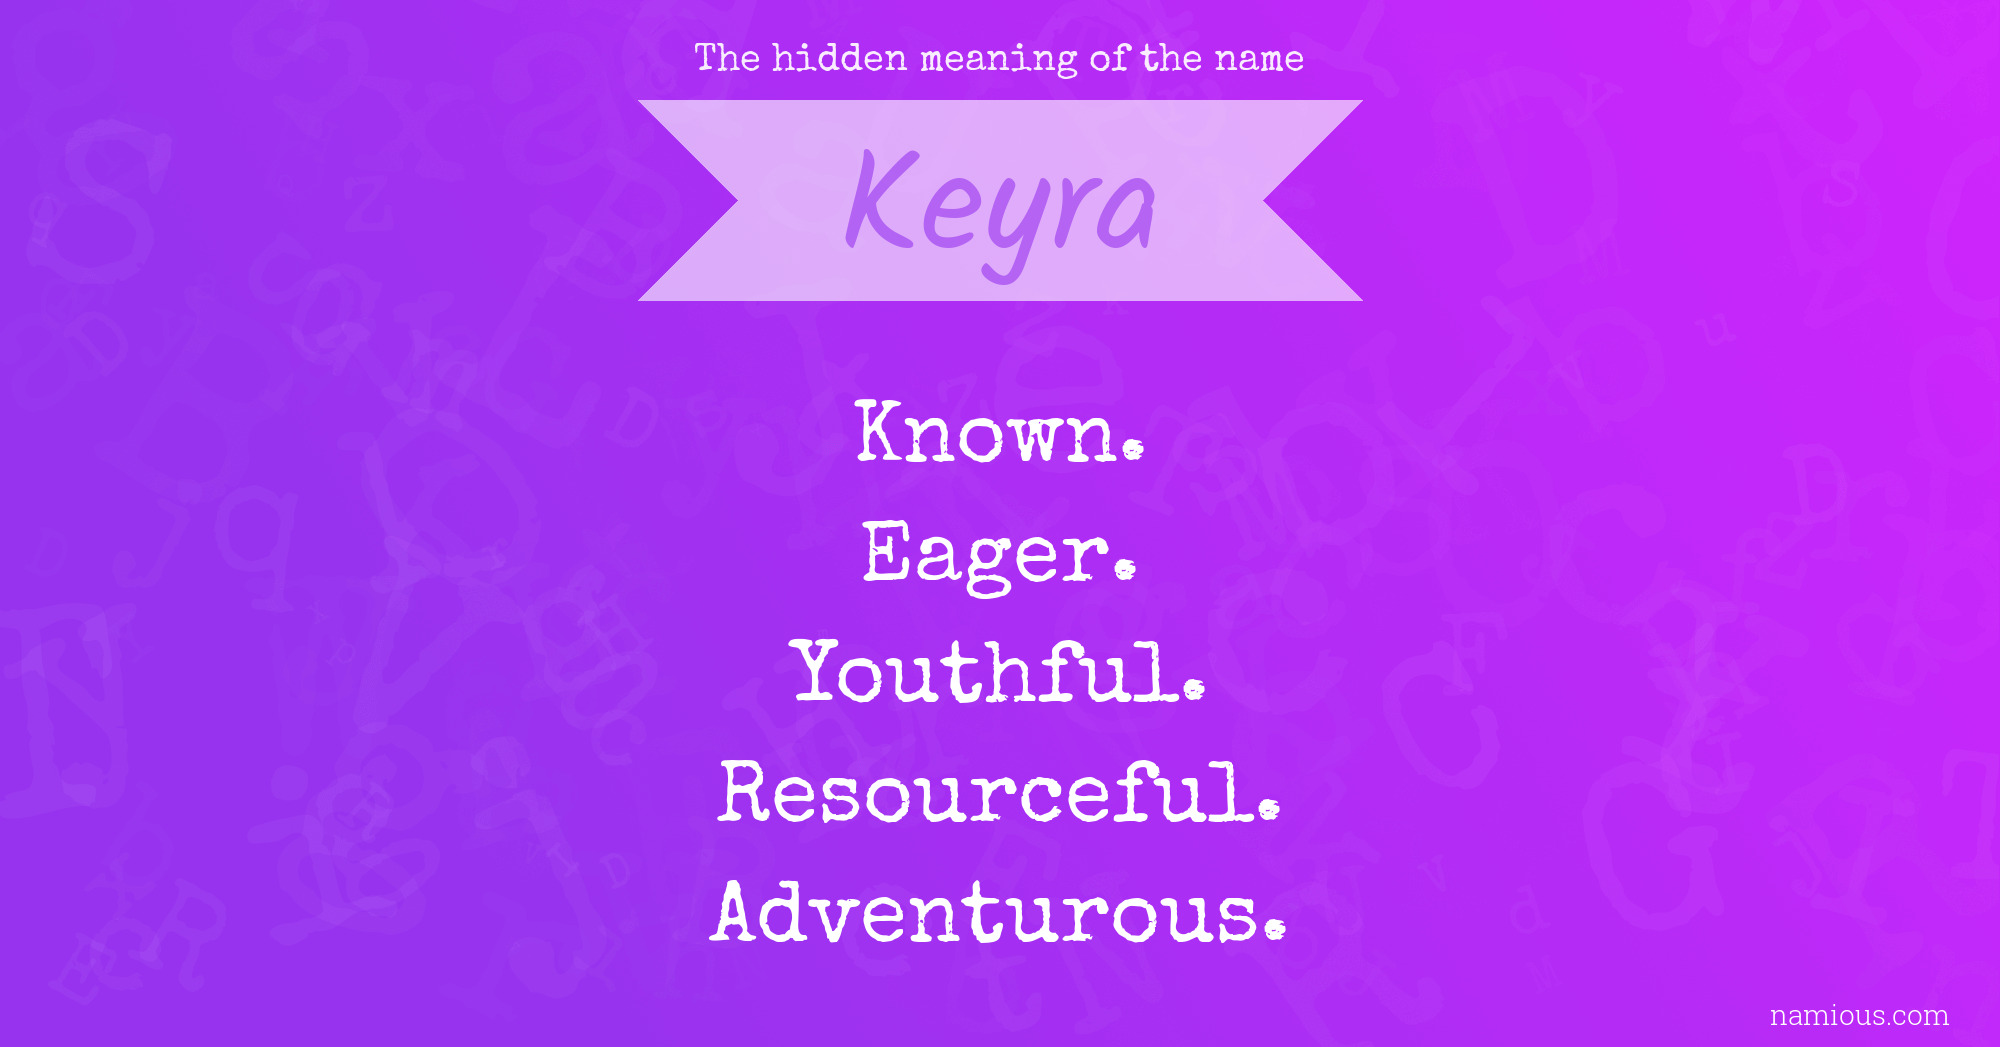 The hidden meaning of the name Keyra